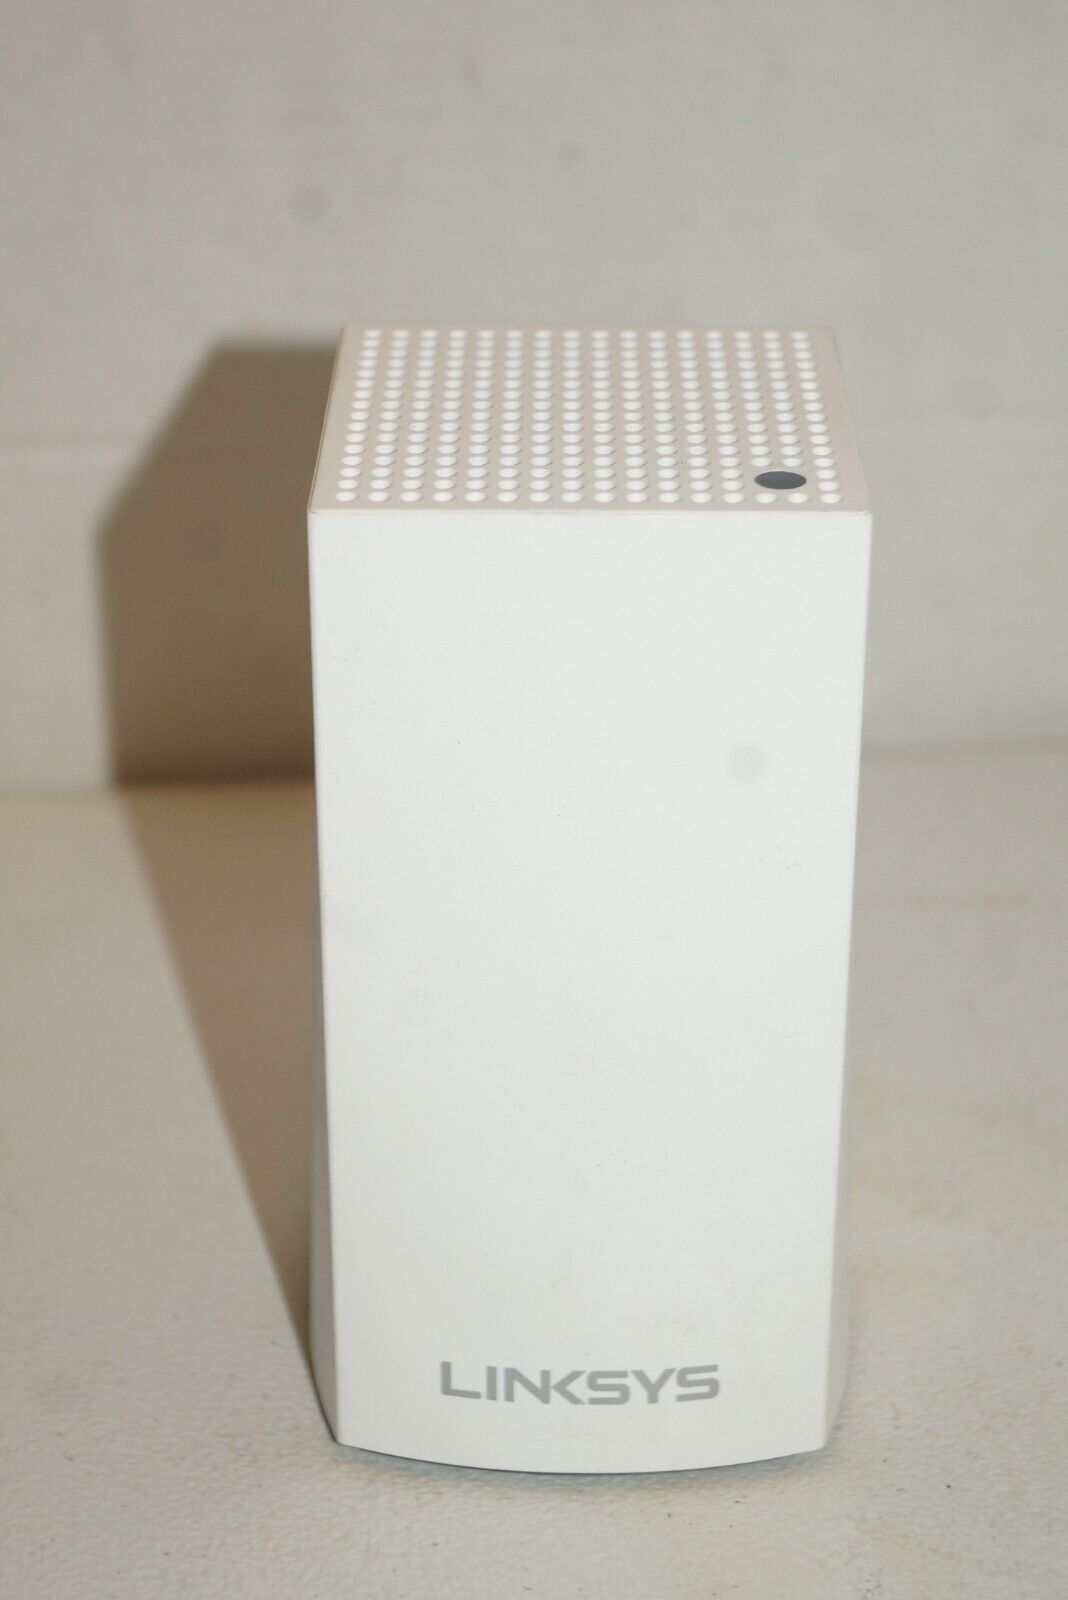 Linksys Velop WHW01 AC3600 Mesh Wireless Router Dual Band